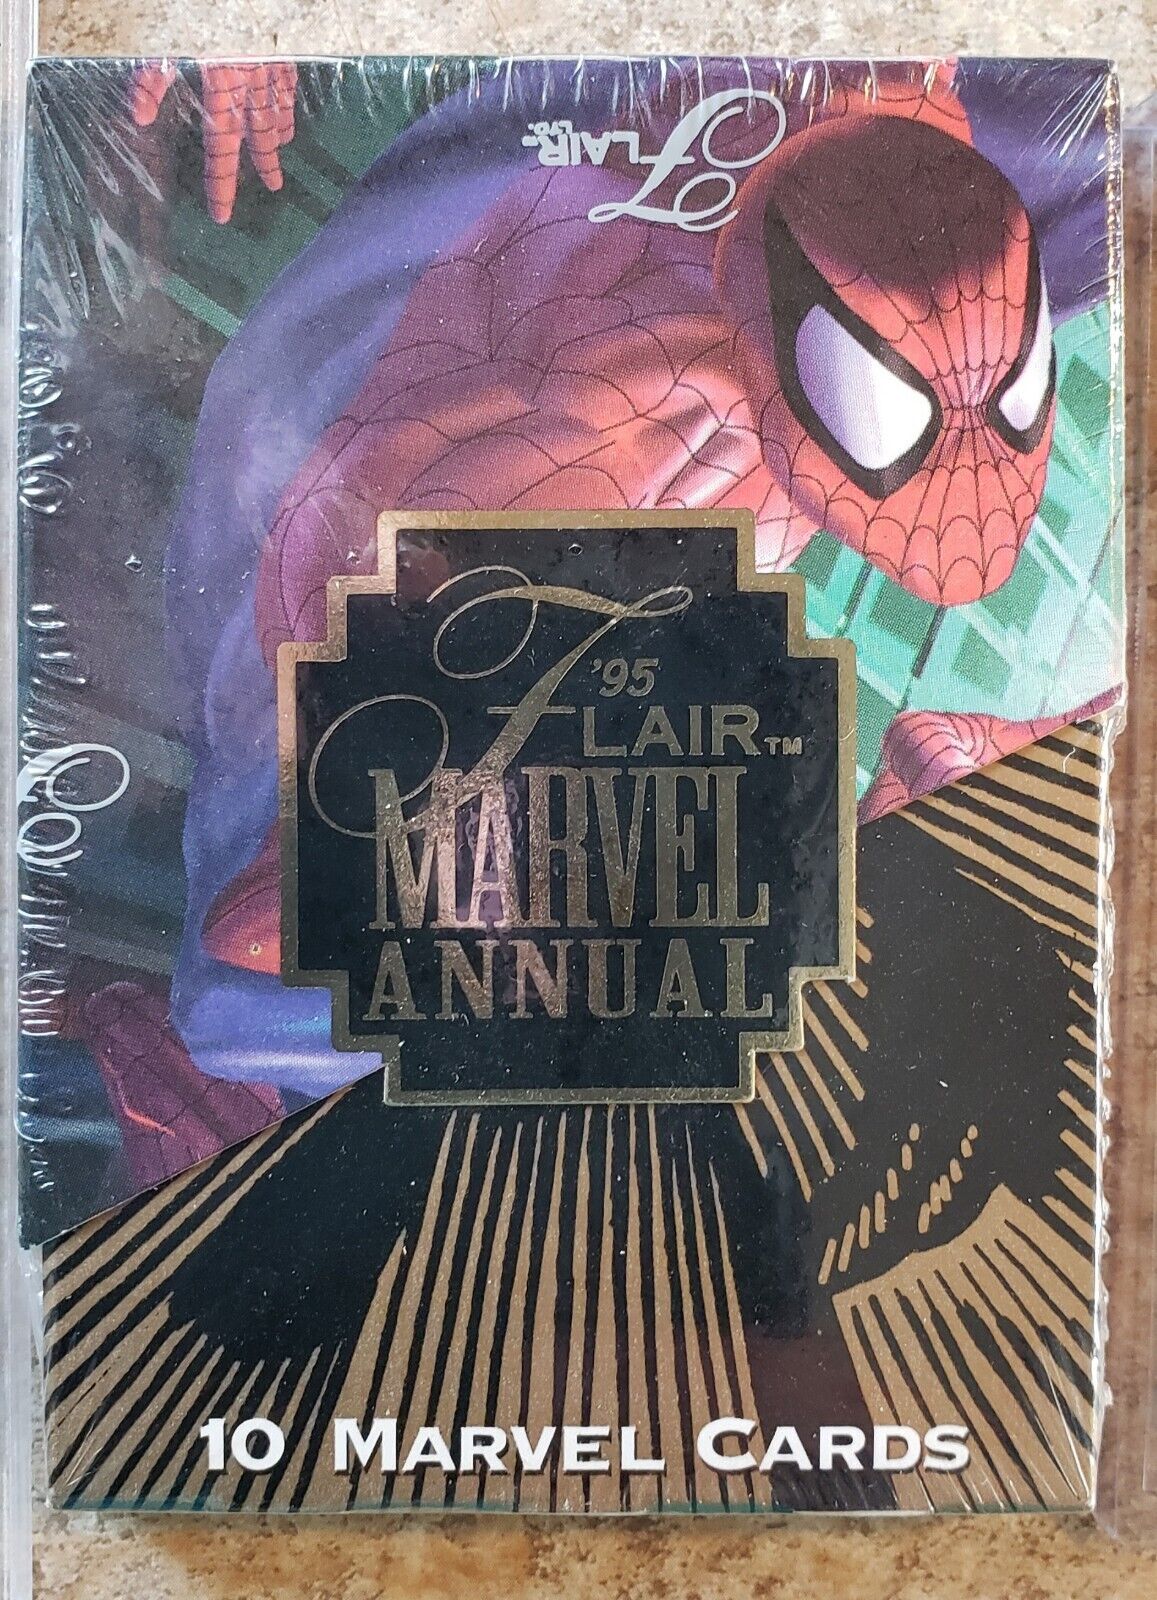 1995 Flair Marvel Annual, Spider-Man Variant, Factory Sealed.